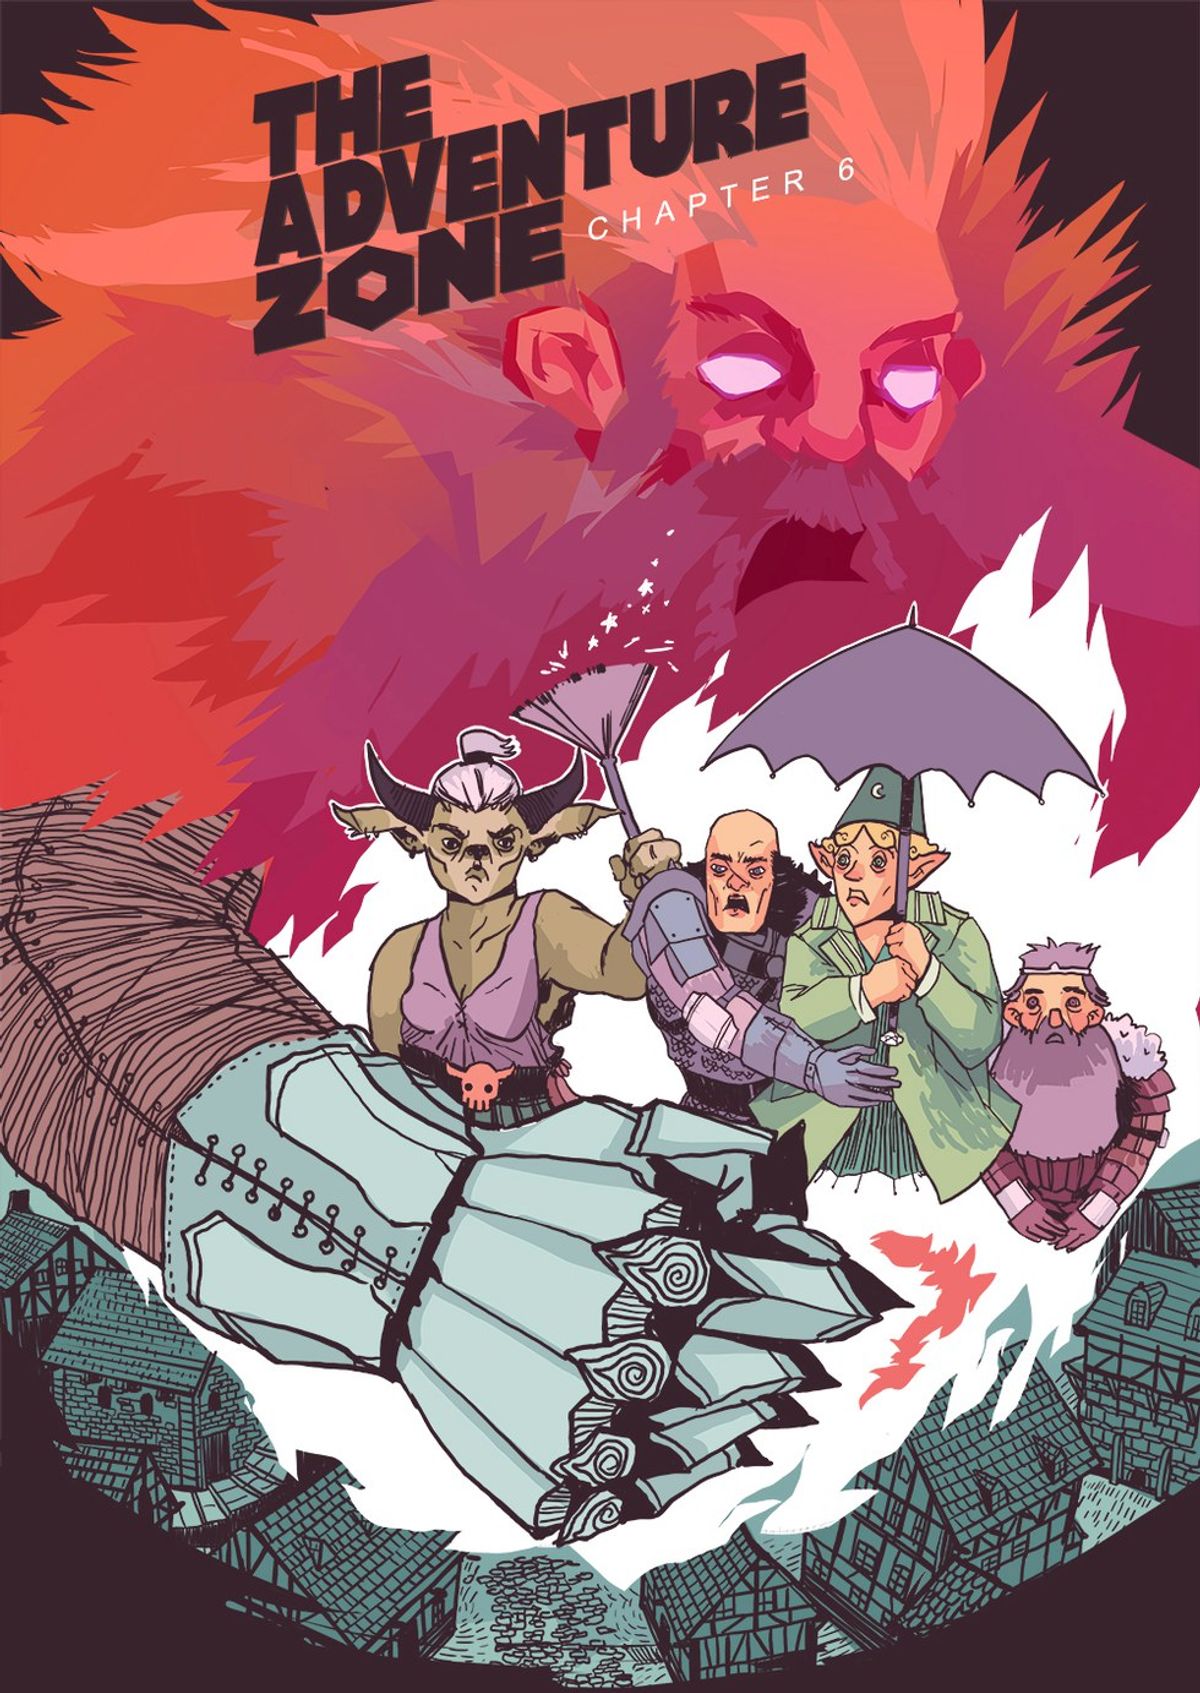 5 Reasons Why I Love 'The Adventure Zone'